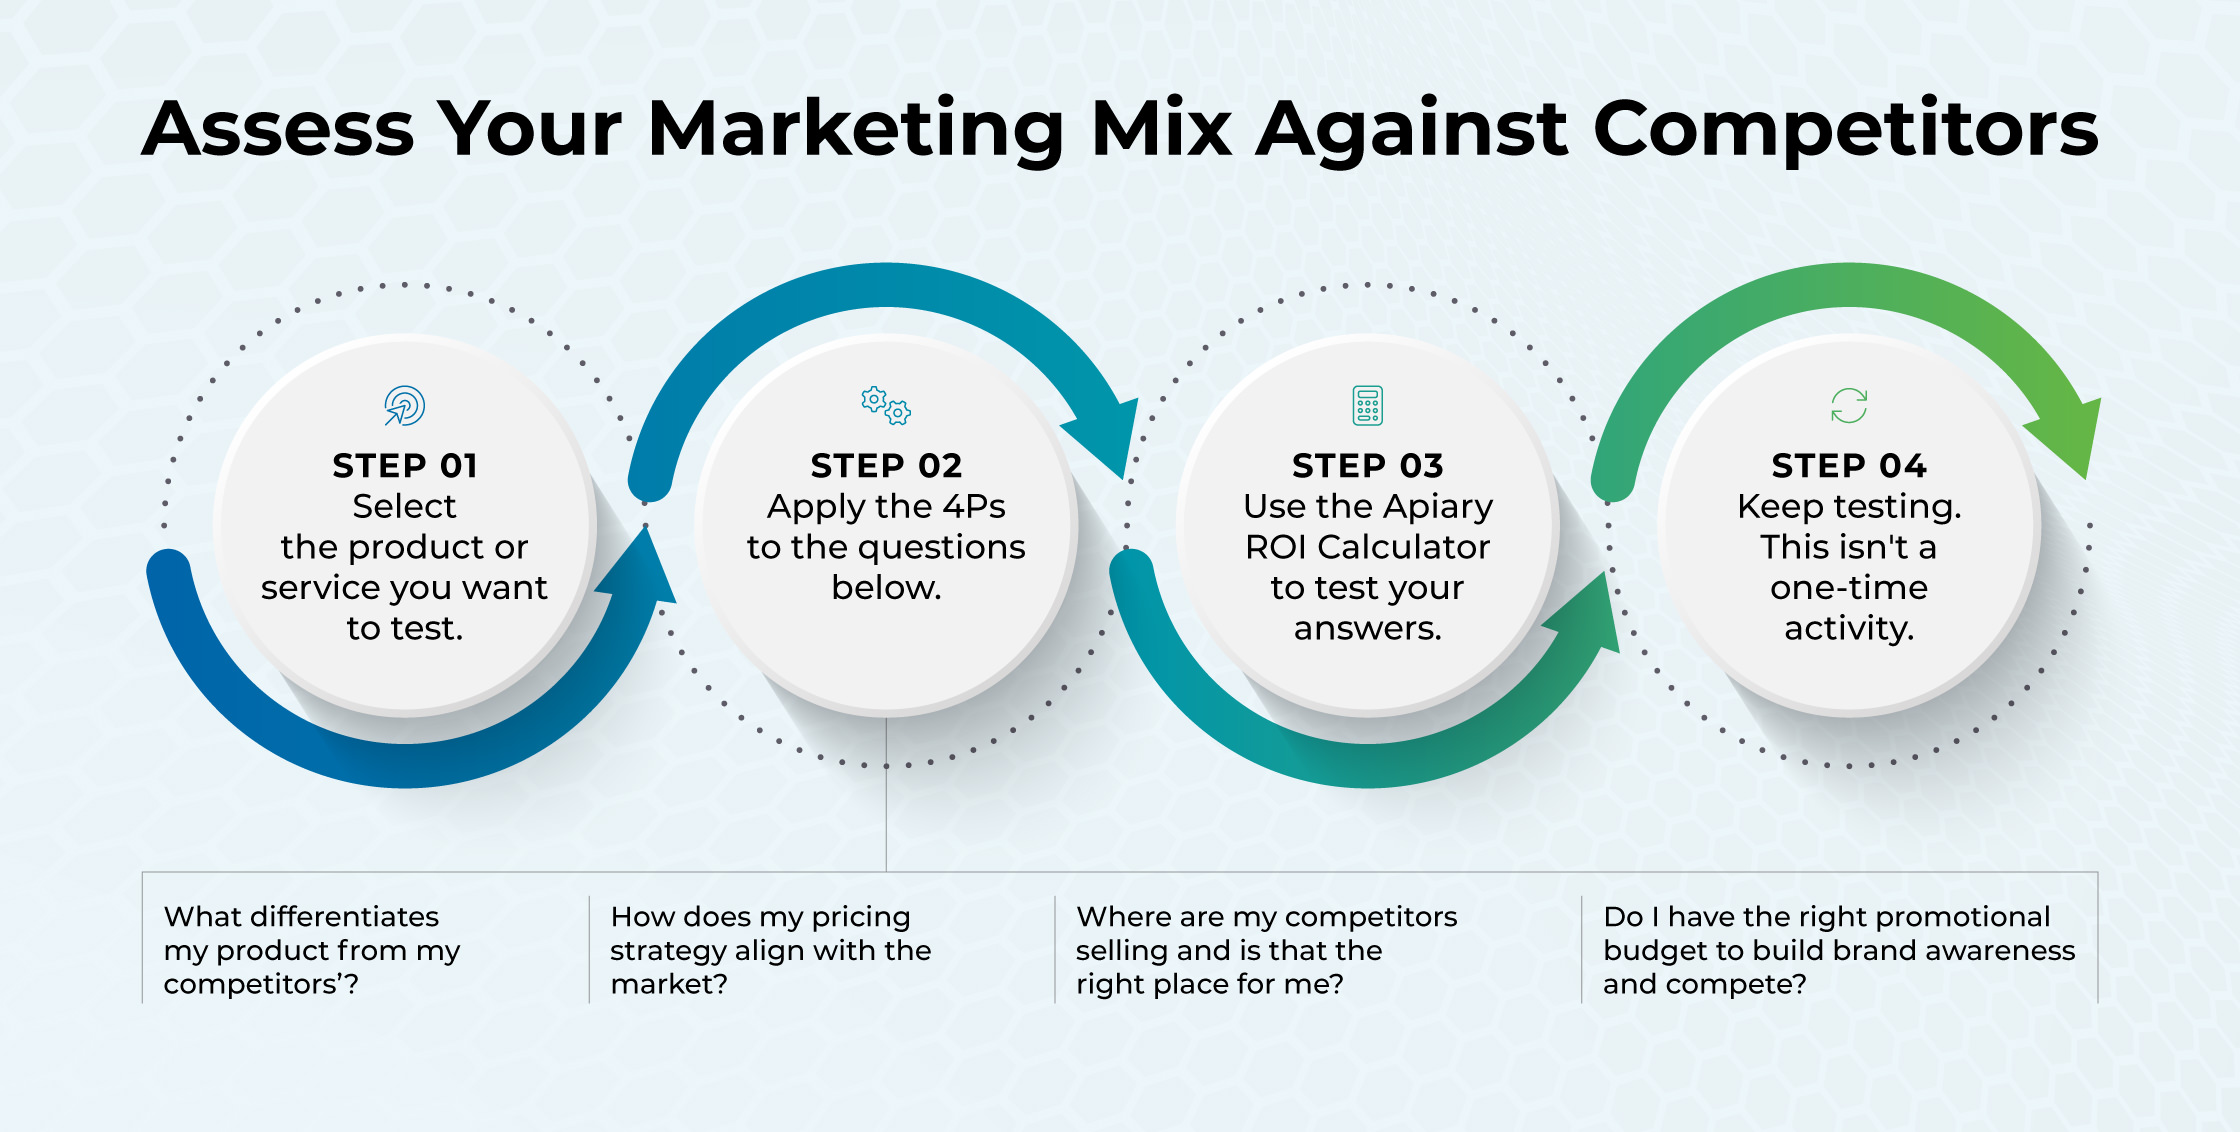 How to assess your marketing mix against competitors